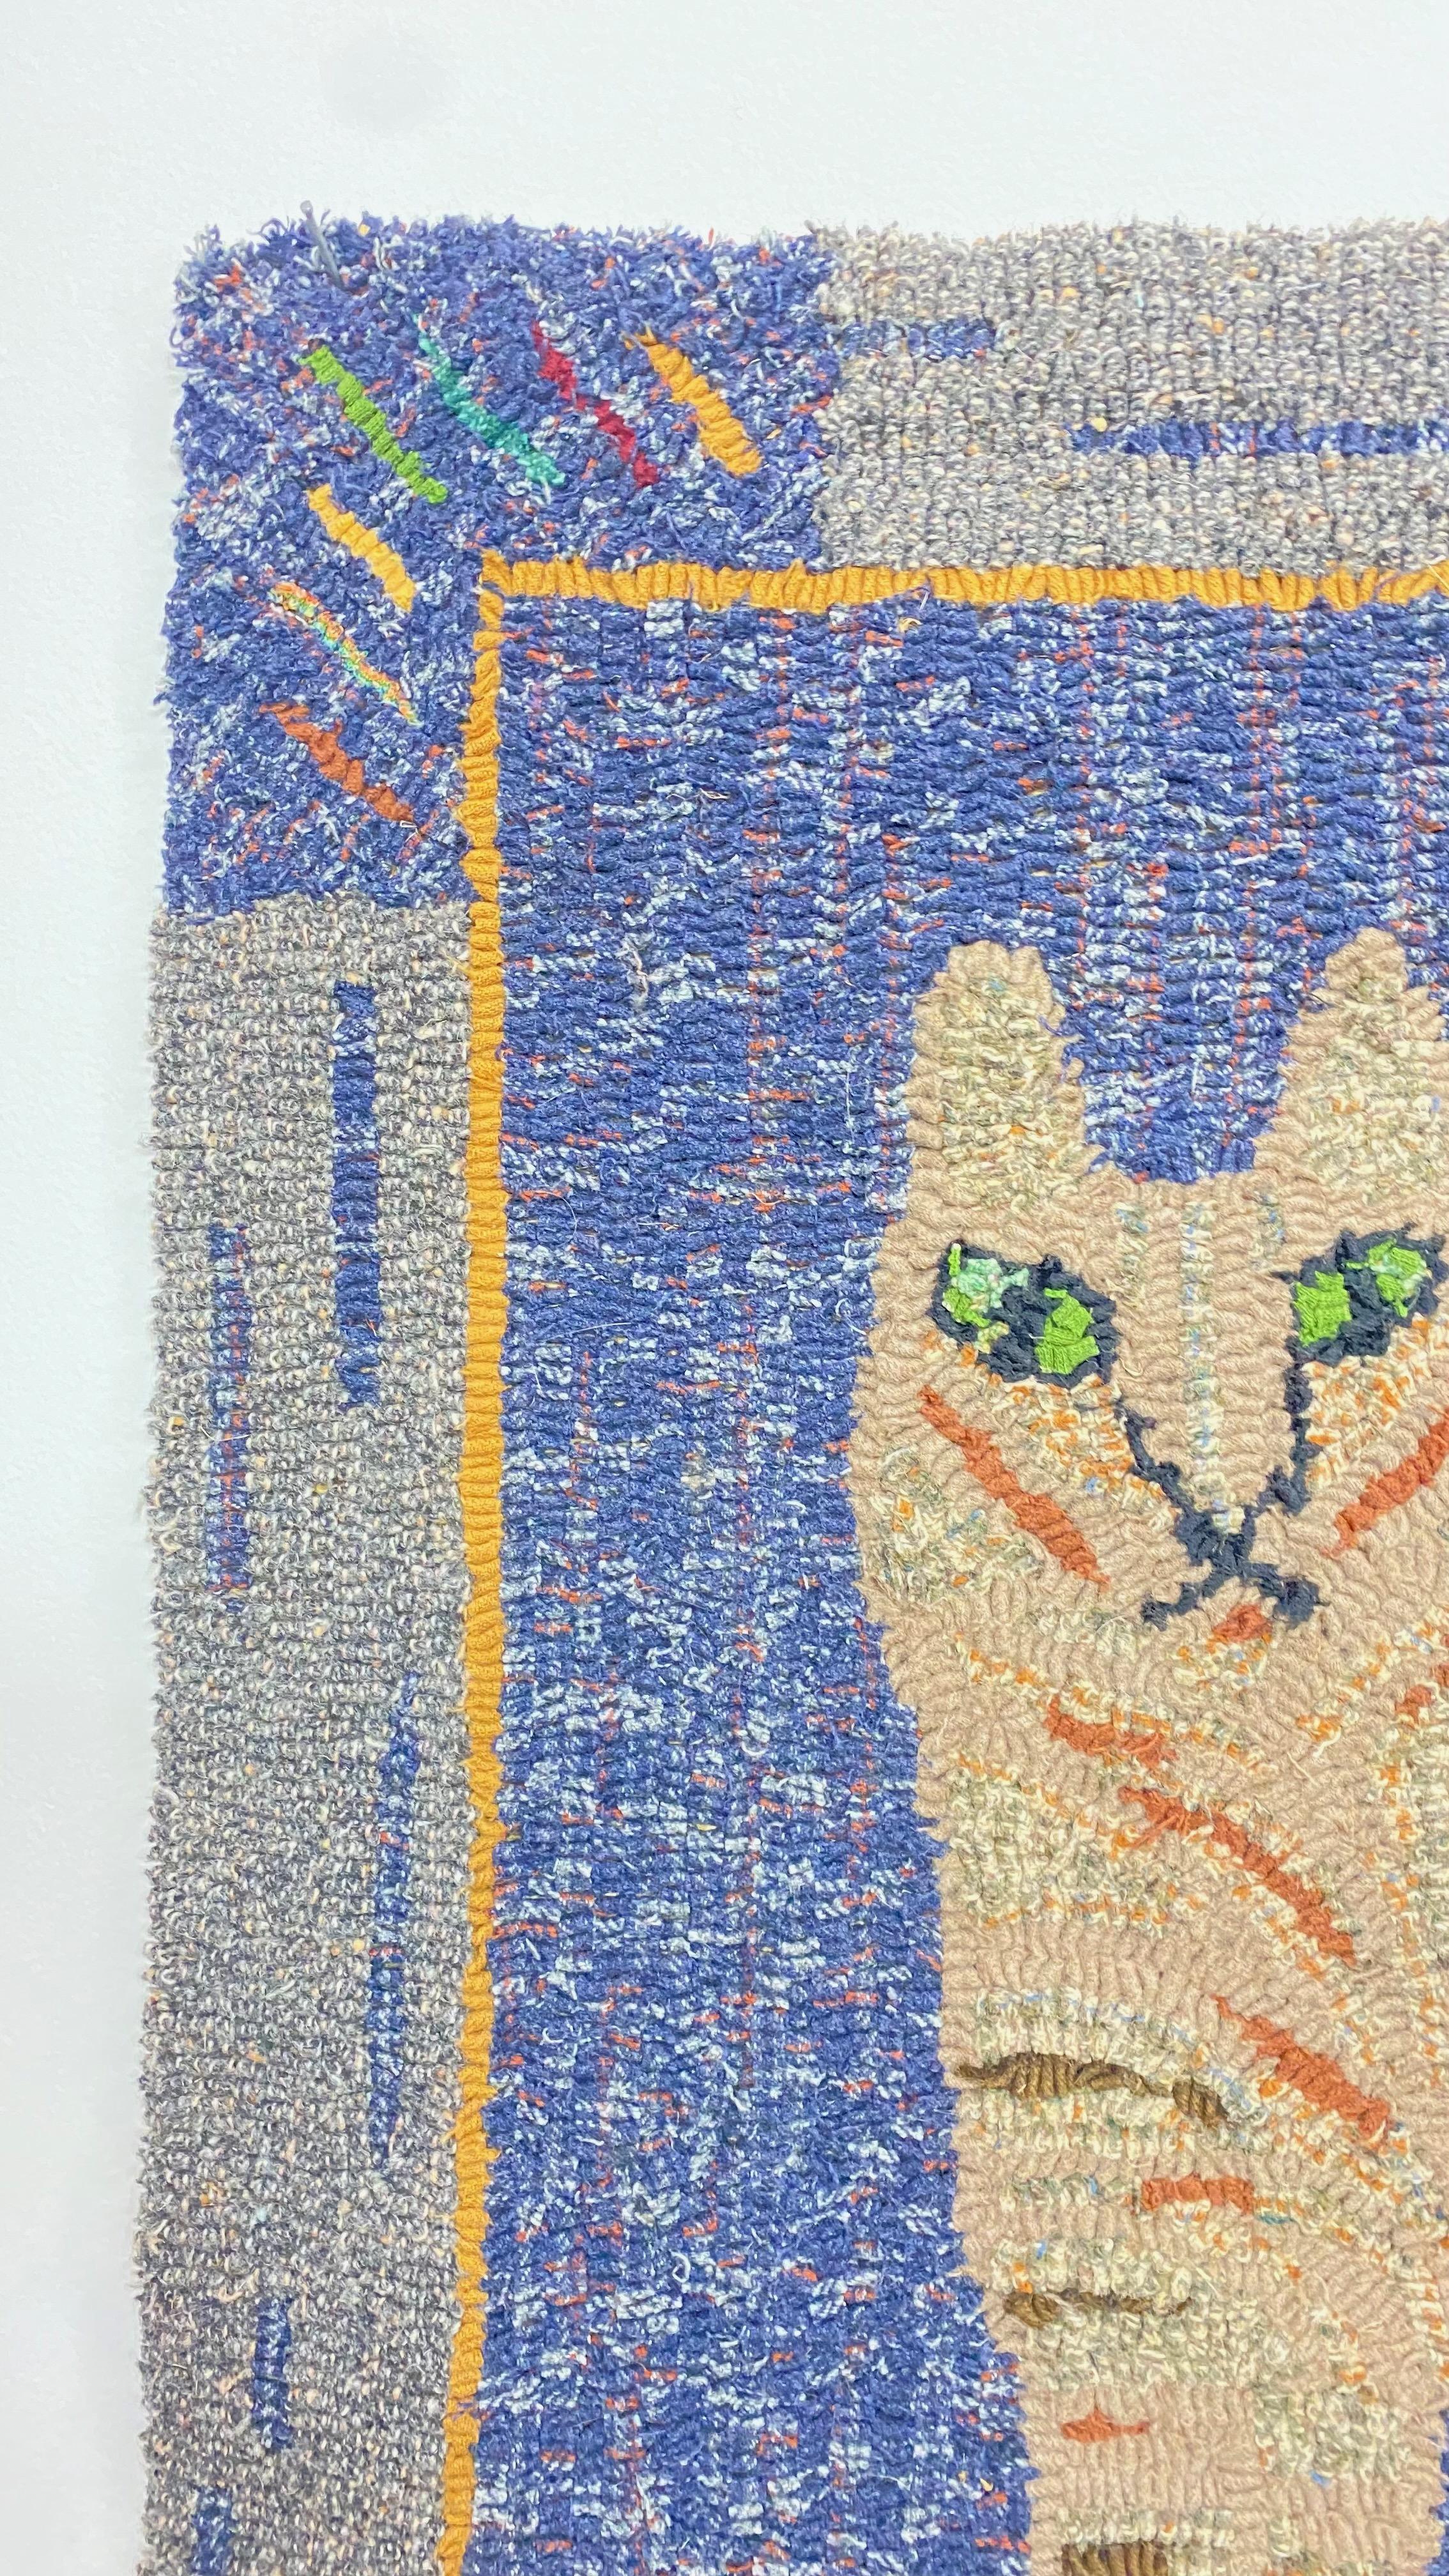 Hand-Crafted American Folk Art Hooked Rag Rug of a Cat, Early 20th Century